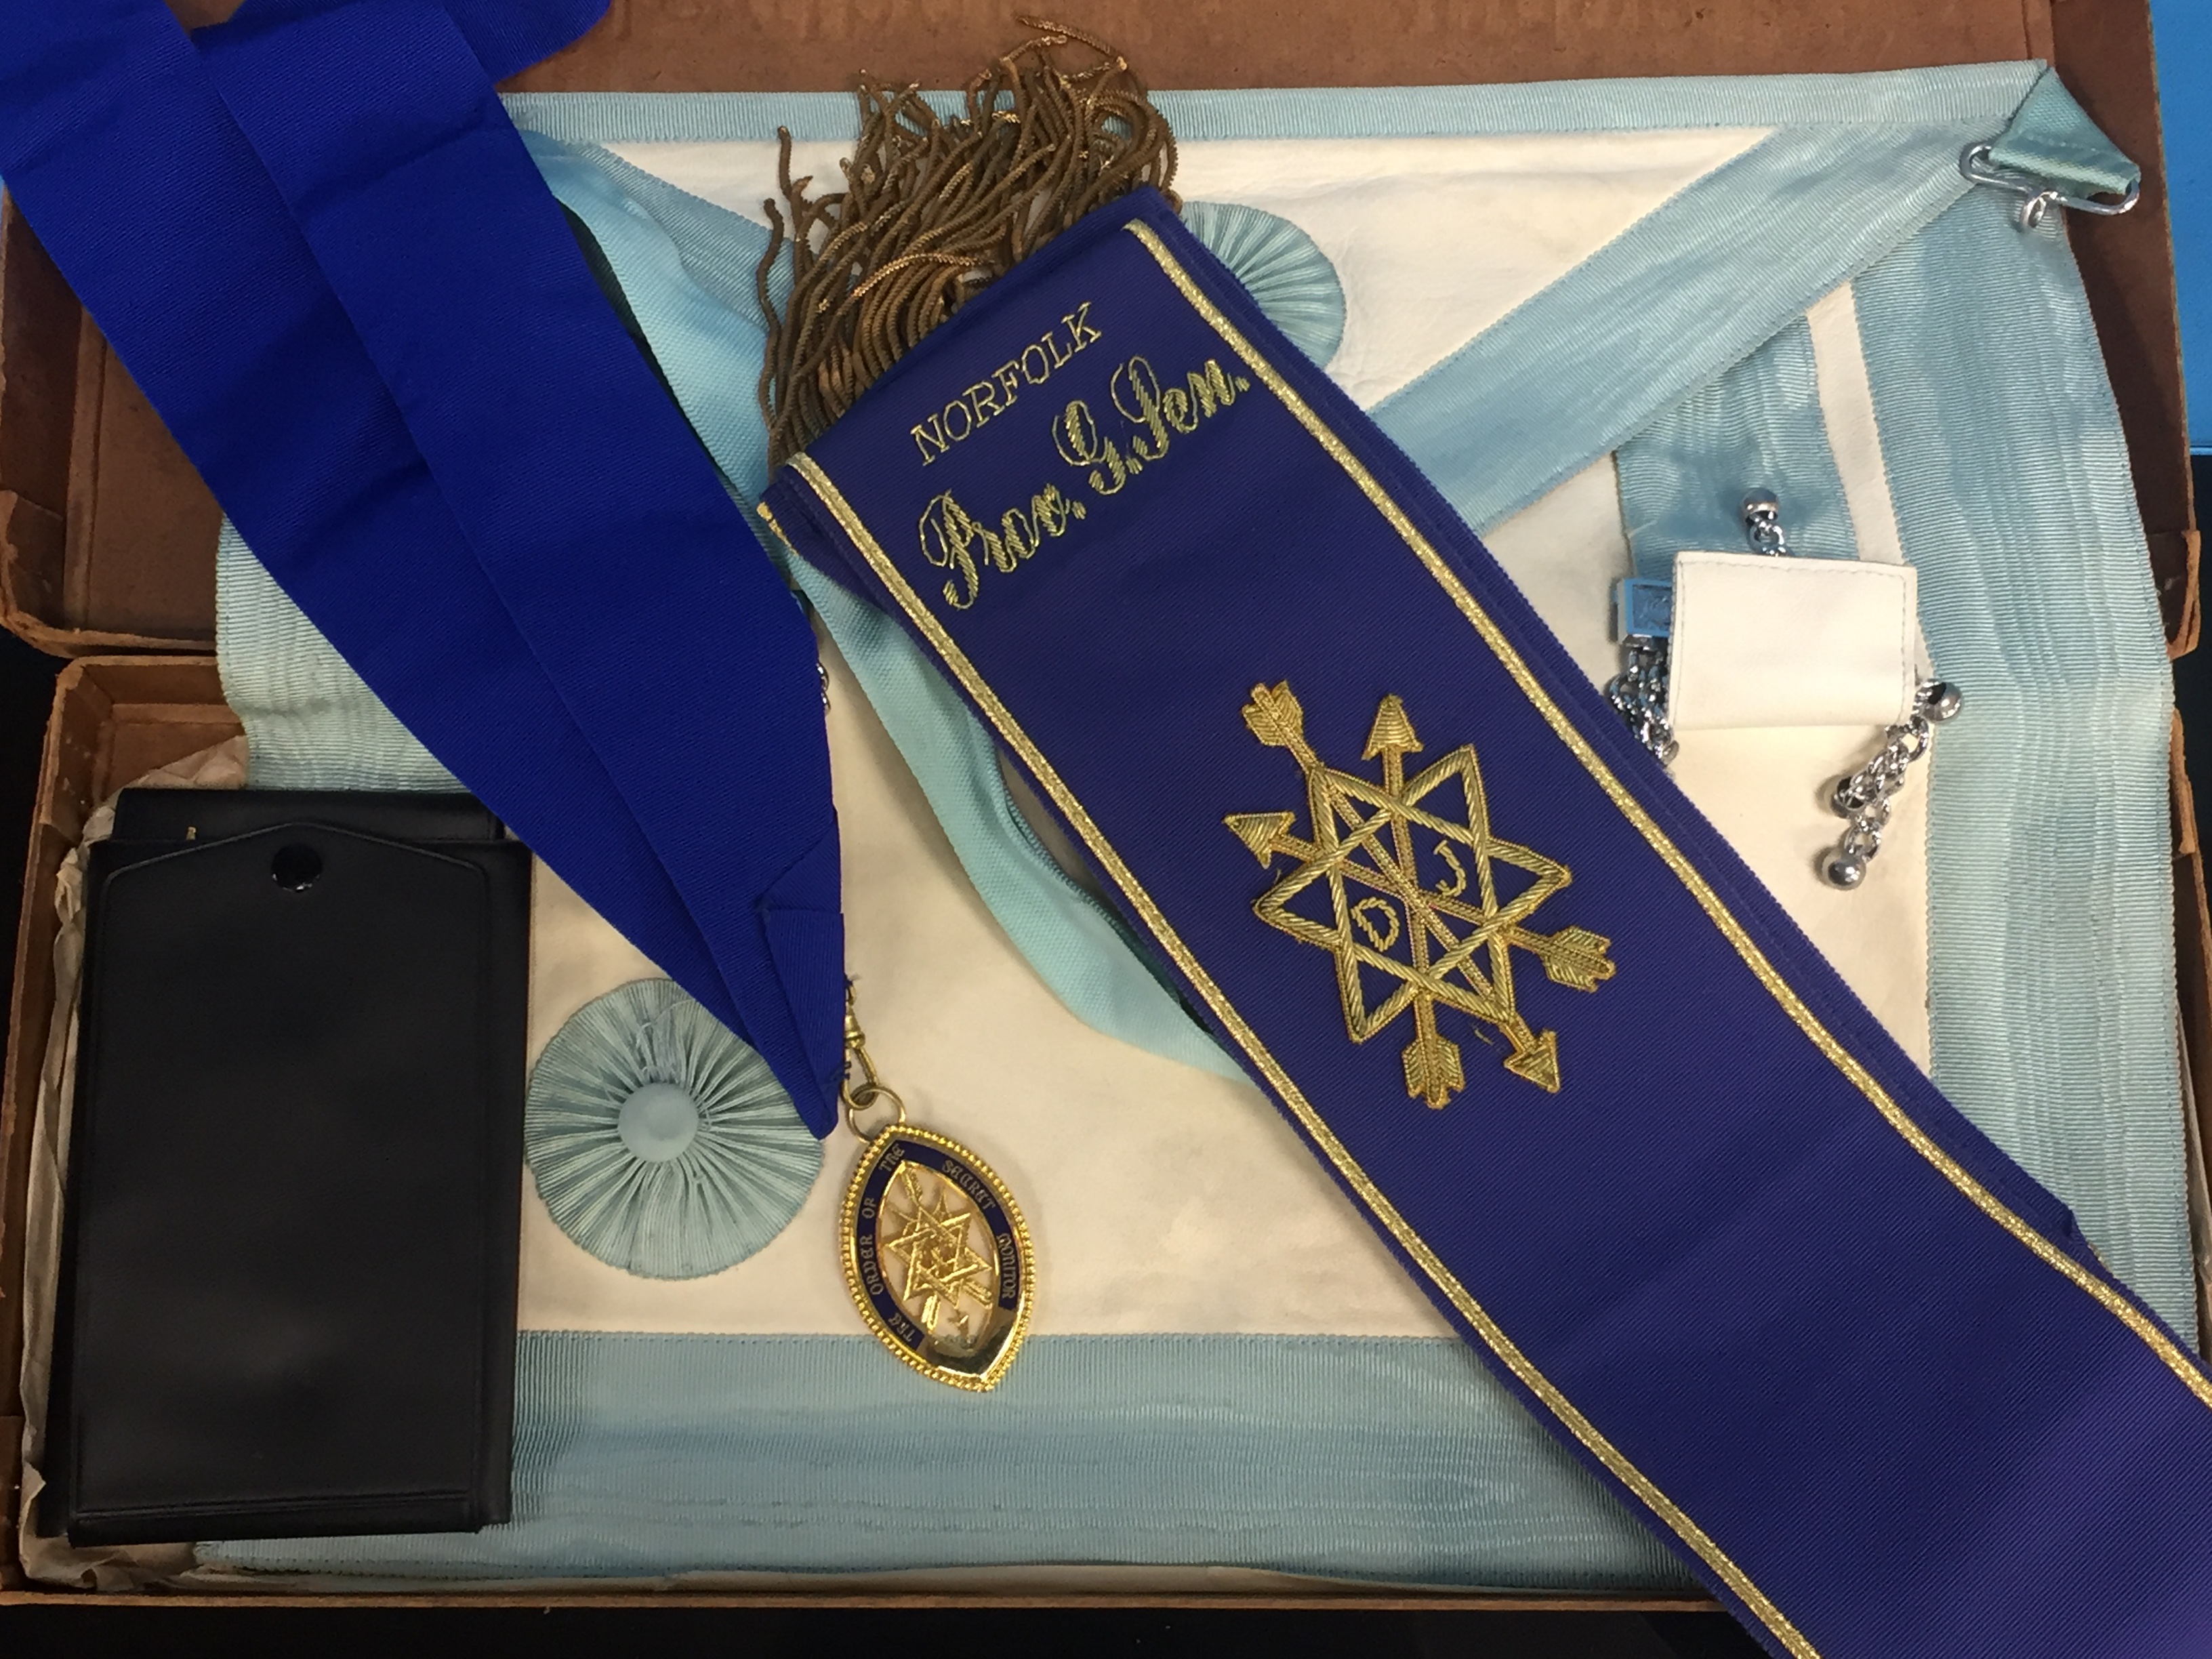 MASONIC APRON AND SASH (THE SASH MARKED NORFOLK) NECK STRAP WITH SUSPENDED MEDAL THE ORDER OF THE